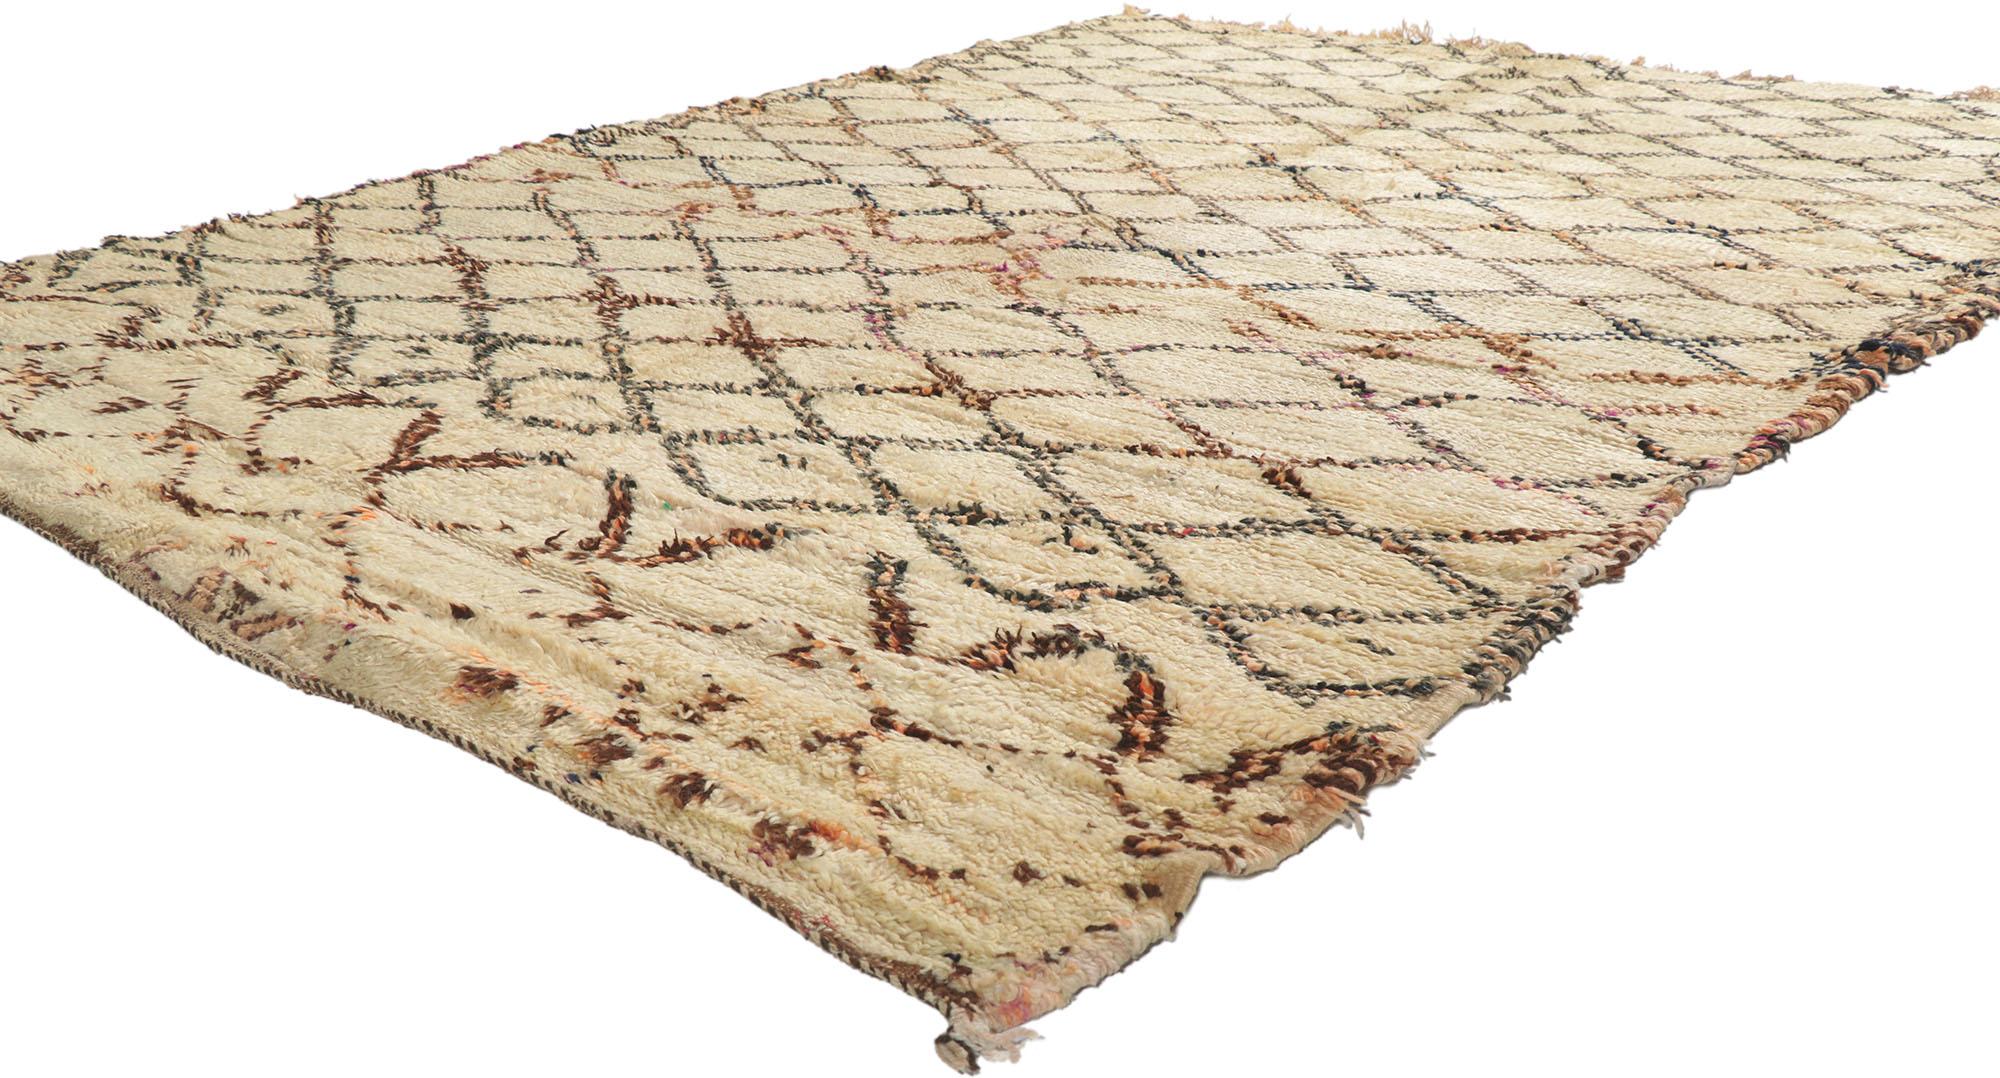 21352 Vintage Berber Moroccan Beni Ourain rug 06'00 x 08'03. With its simplicity, plush pile and tribal style, this hand knotted wool vintage Berber Beni Ourain Moroccan rug is a captivating vision of woven beauty. It features a diamond lattice